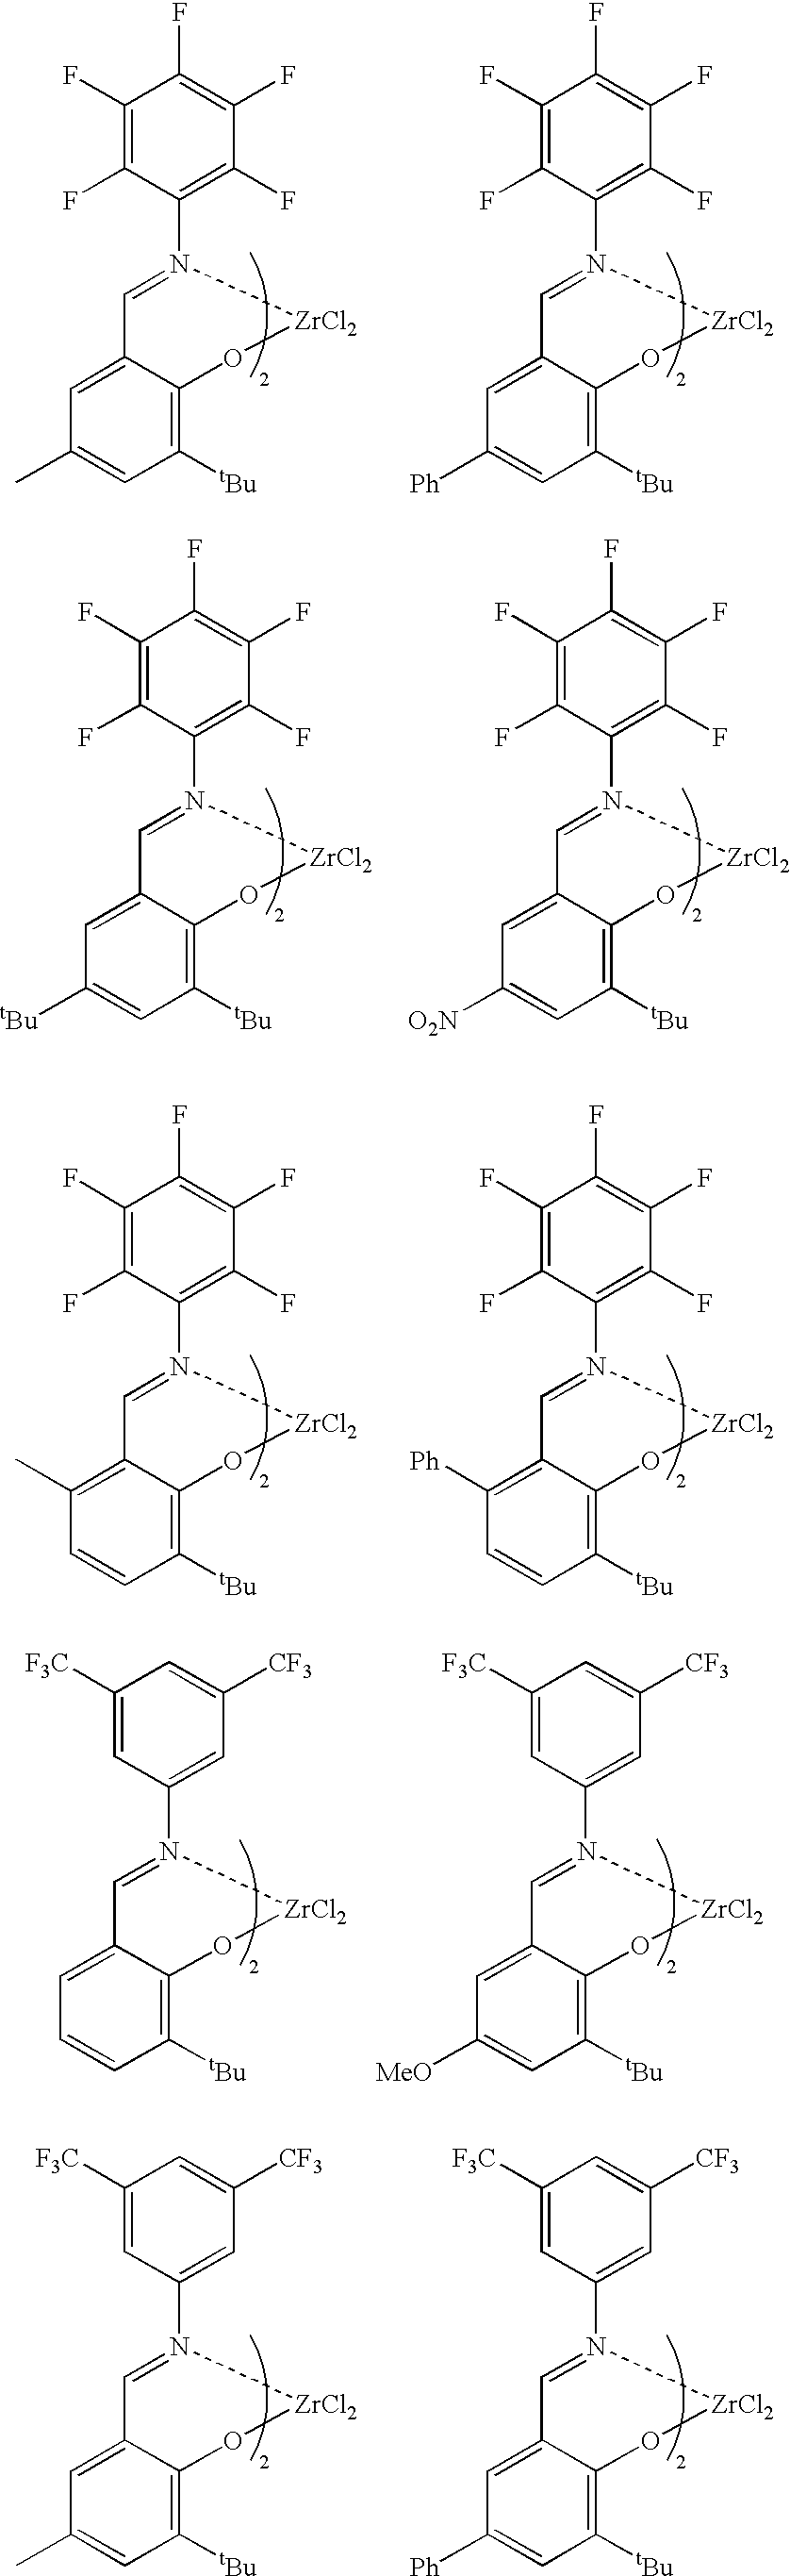 Magnesium-containing carrier components and application thereof to olefin polymerization